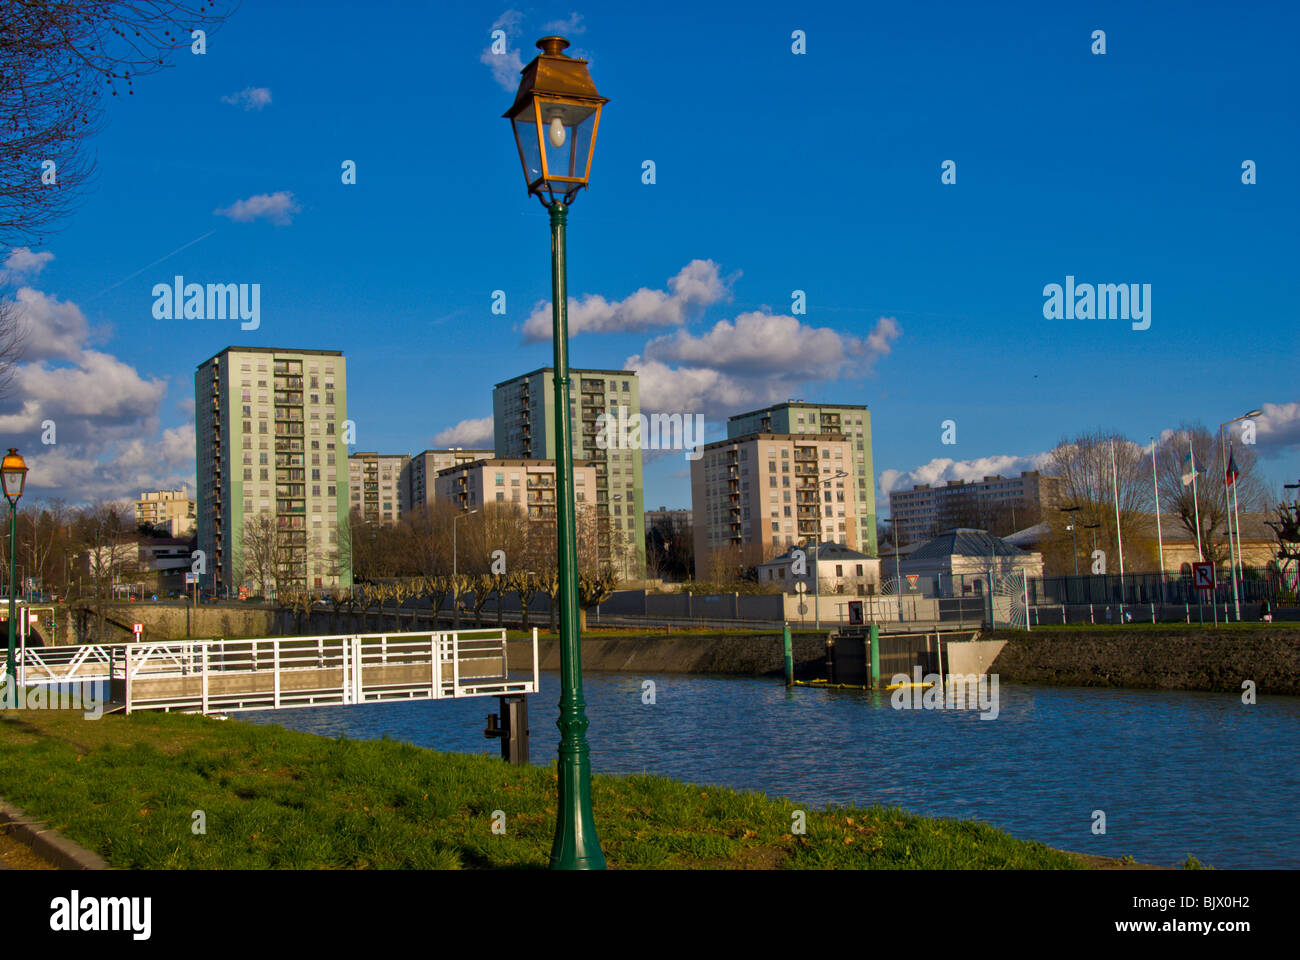 Paris, France,  Architecture, Modern Apartment City Buildings in St. Maurice, Suburb, on Canal, hlm france, Parisian suburbs, housing projects, france suburb residential immobilier Stock Photo